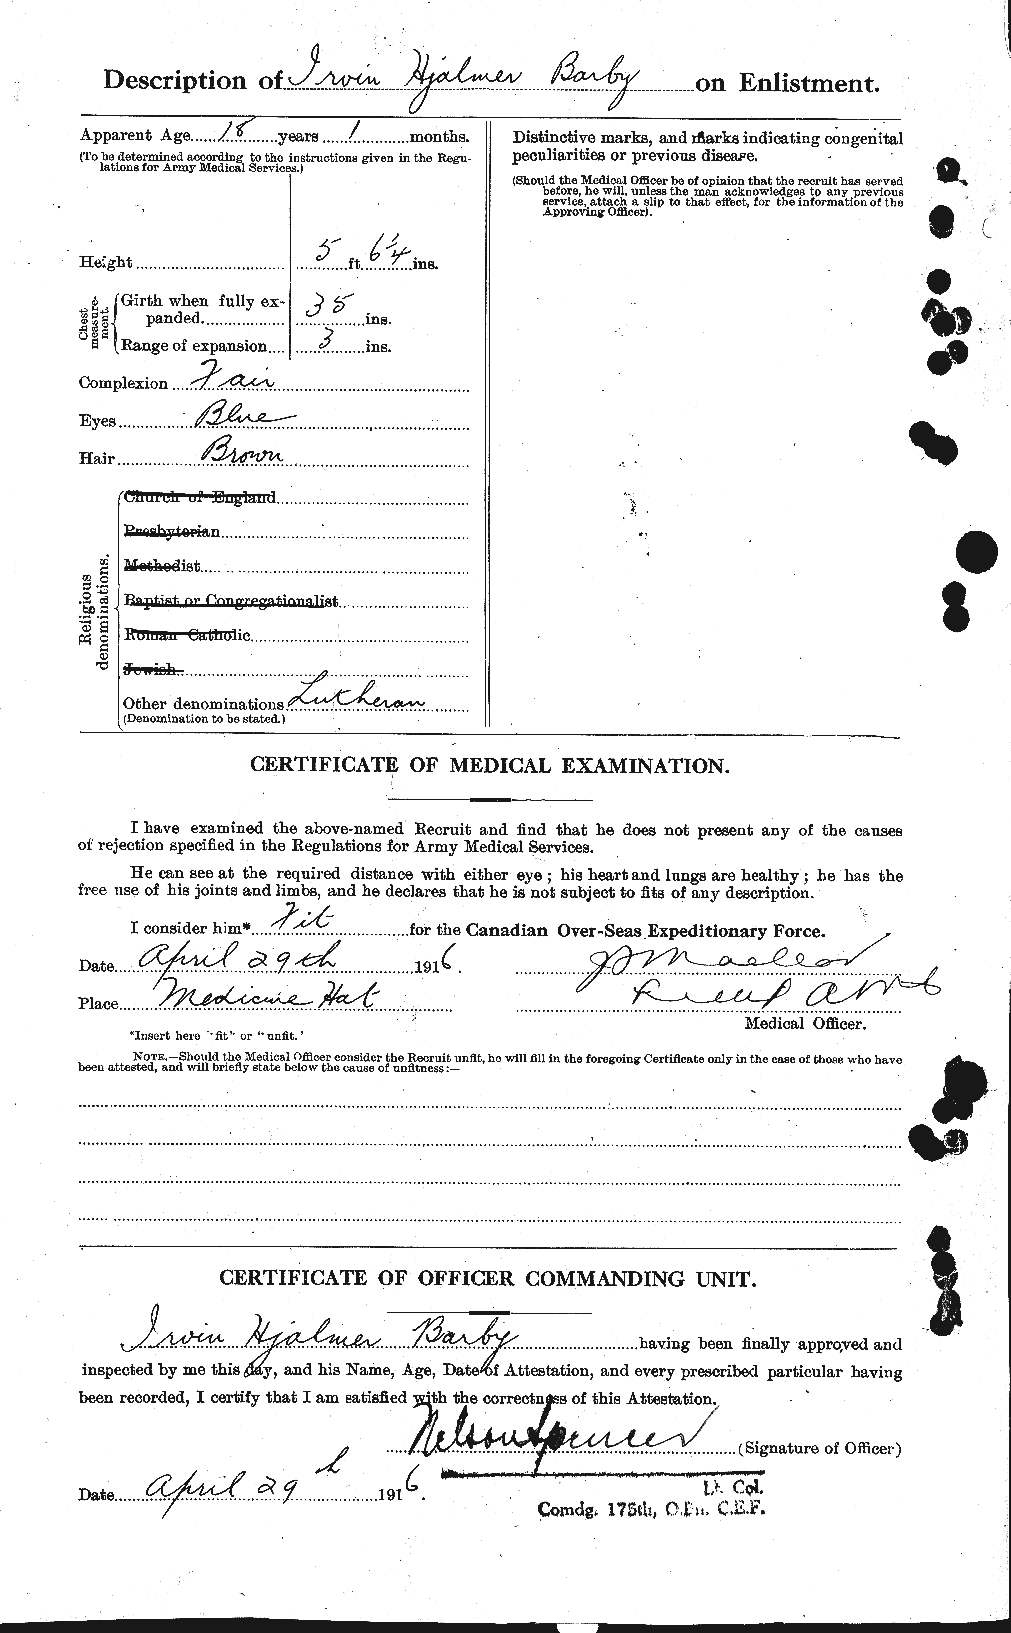 Personnel Records of the First World War - CEF 220989b